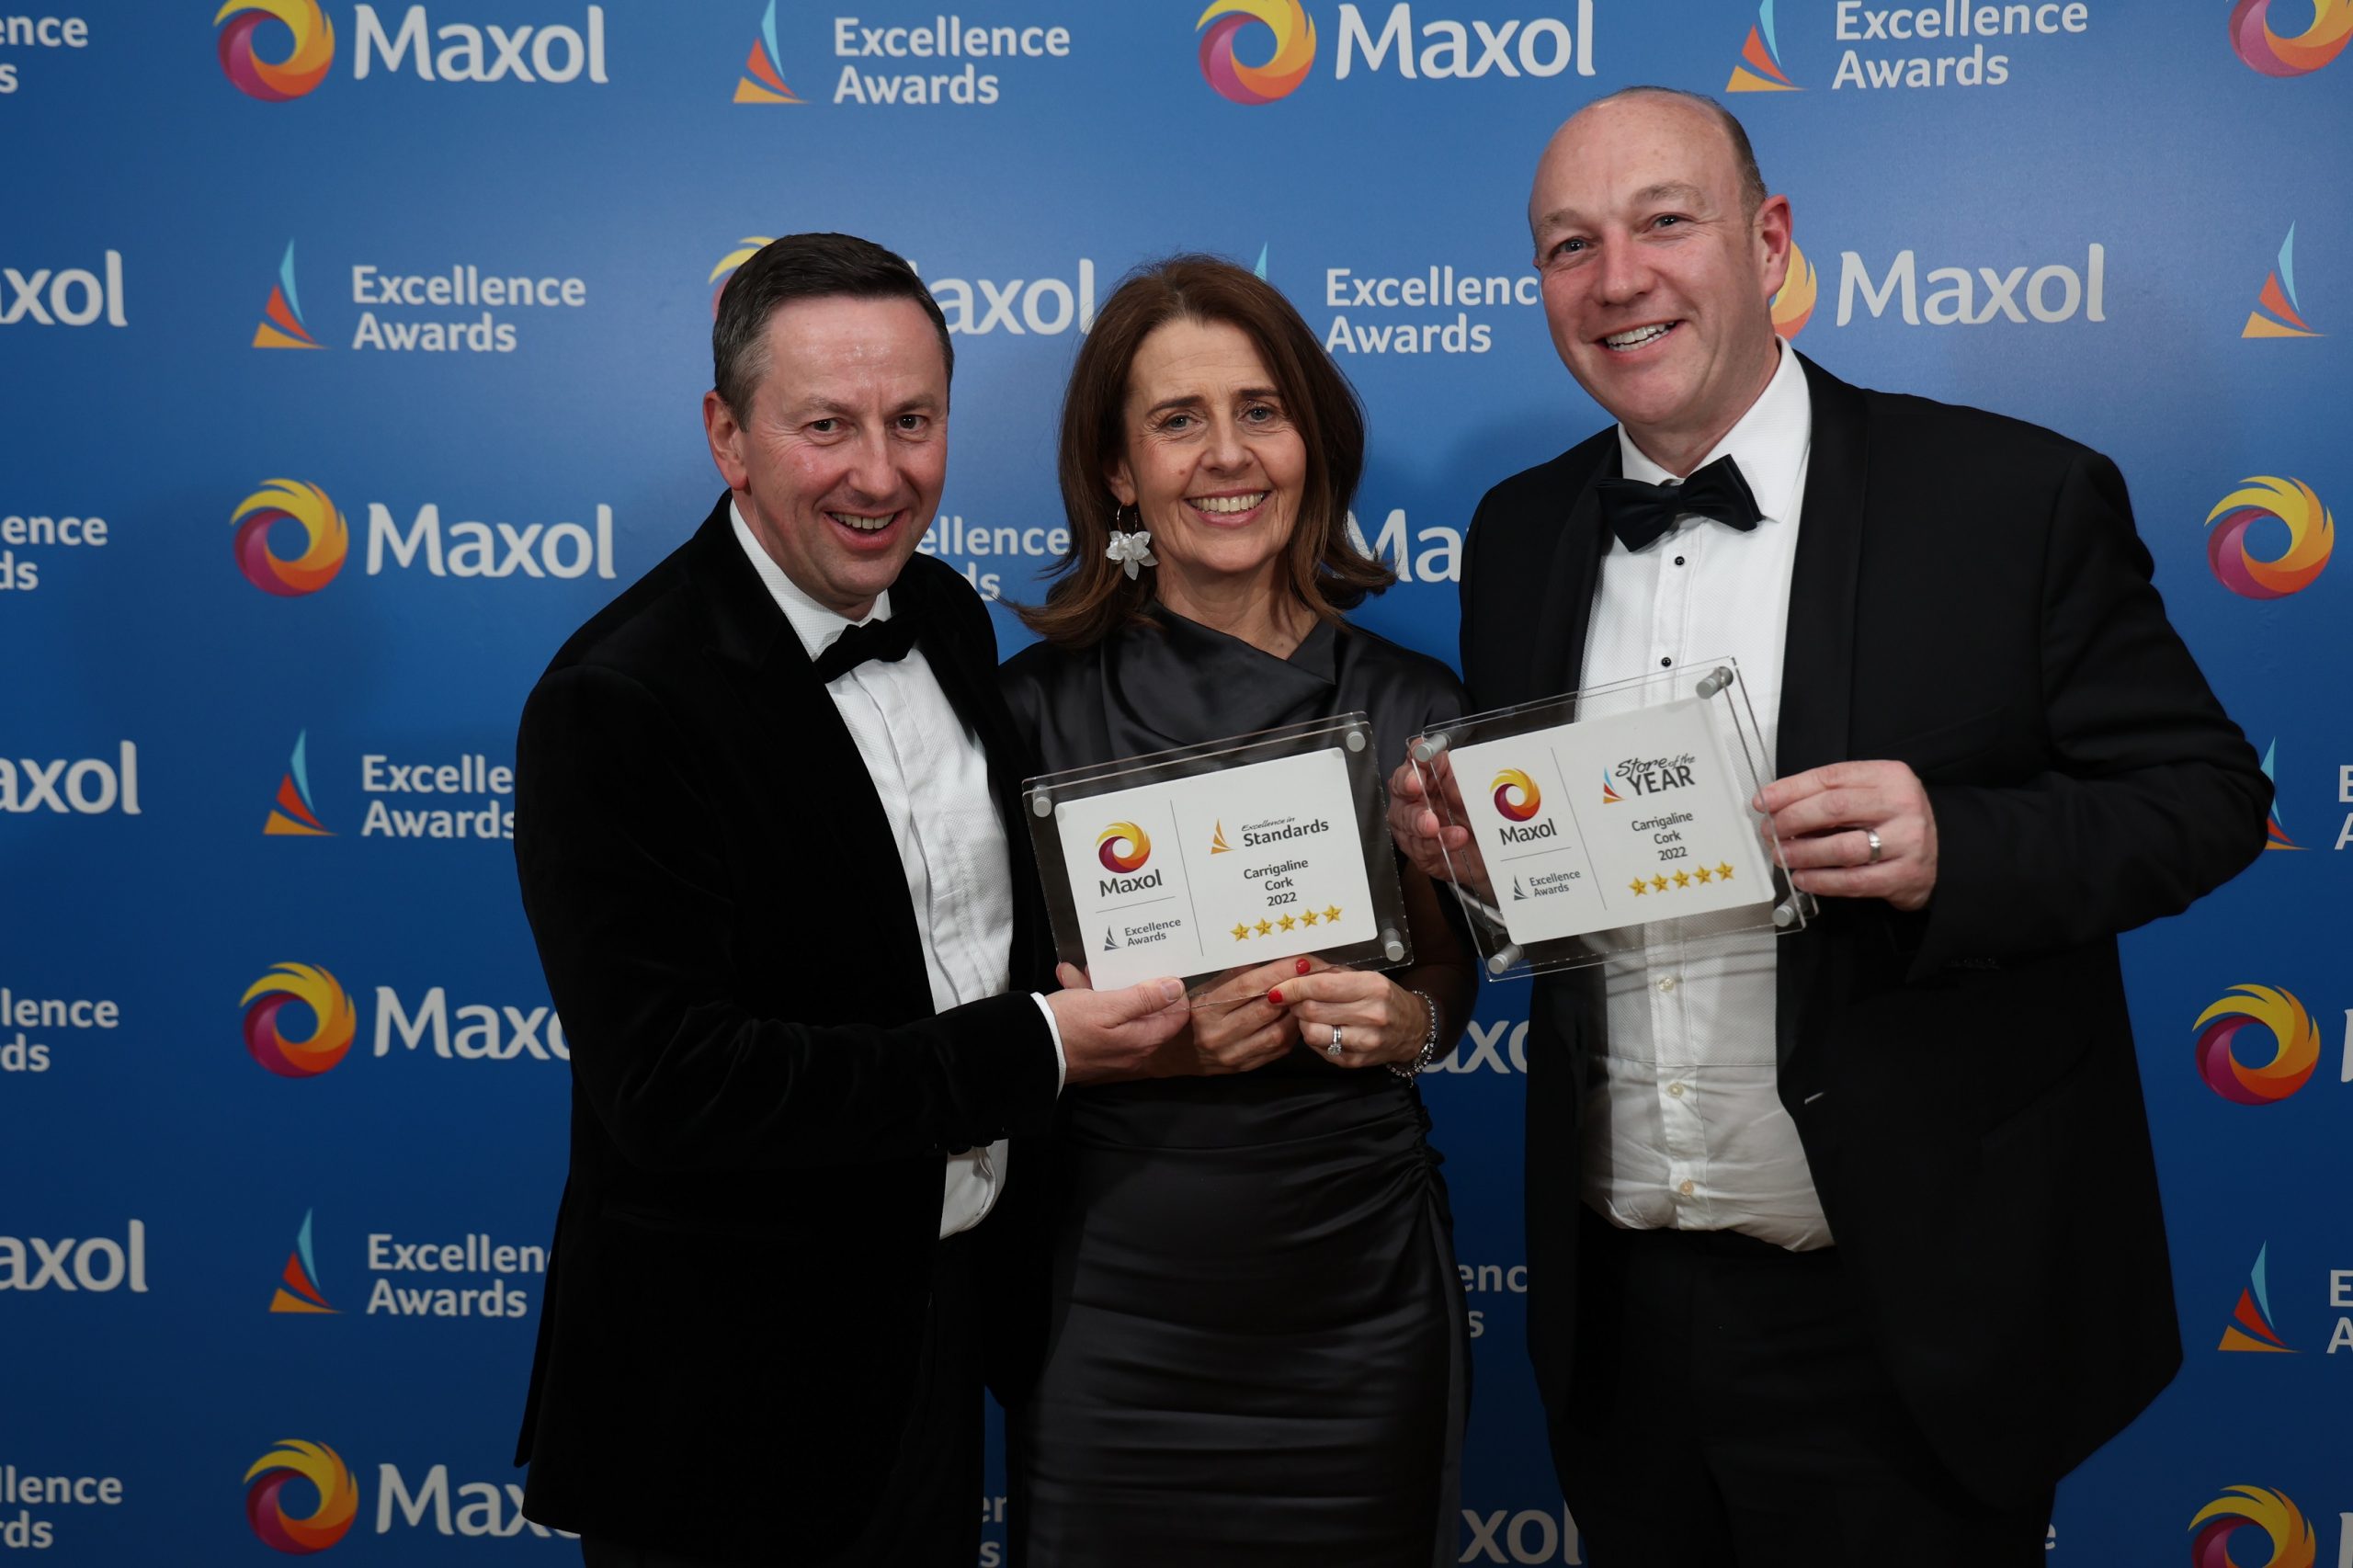 Maxol announces Excellence Awards winners